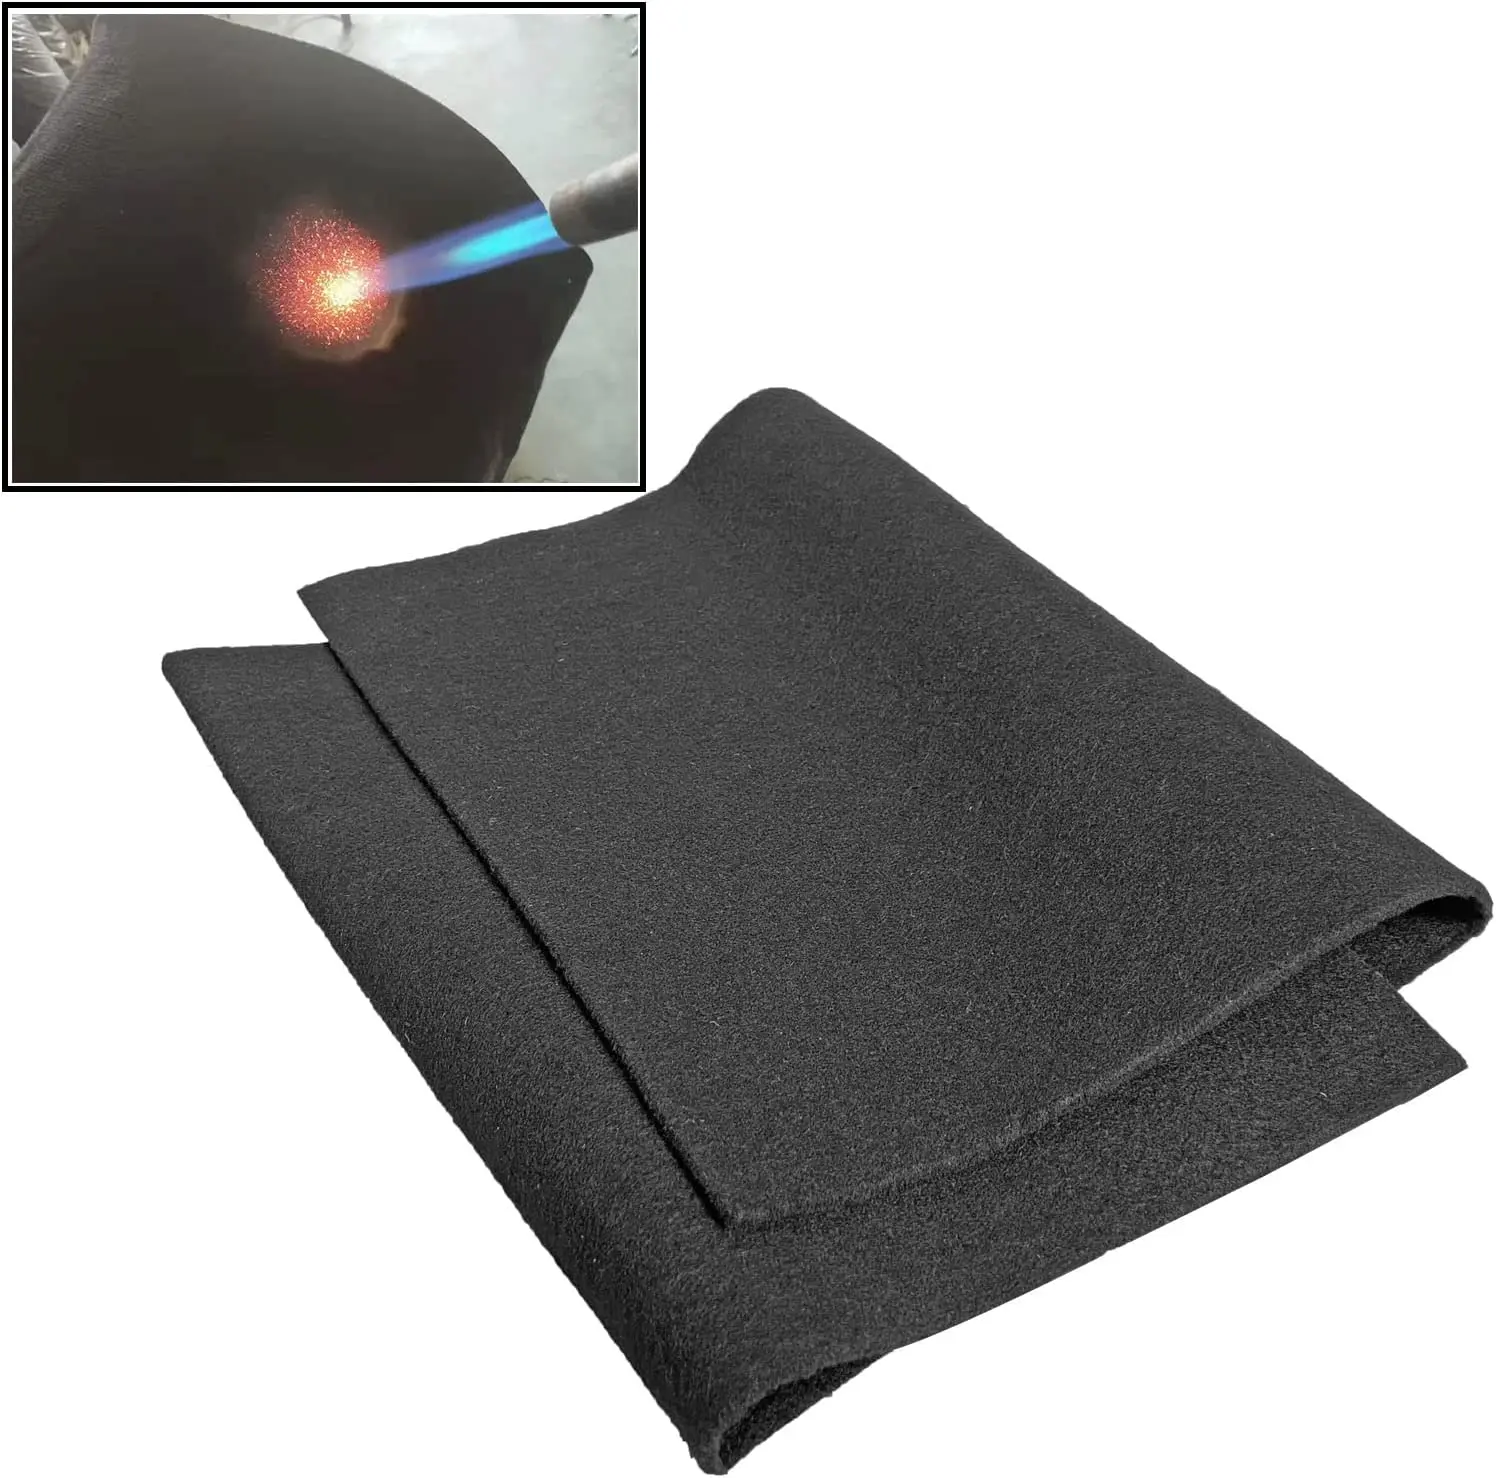 Blanket Manufacturer Lowes Fire Proof Insulation Fiber China Fire Fight Fabric Color Material Pieces Origin